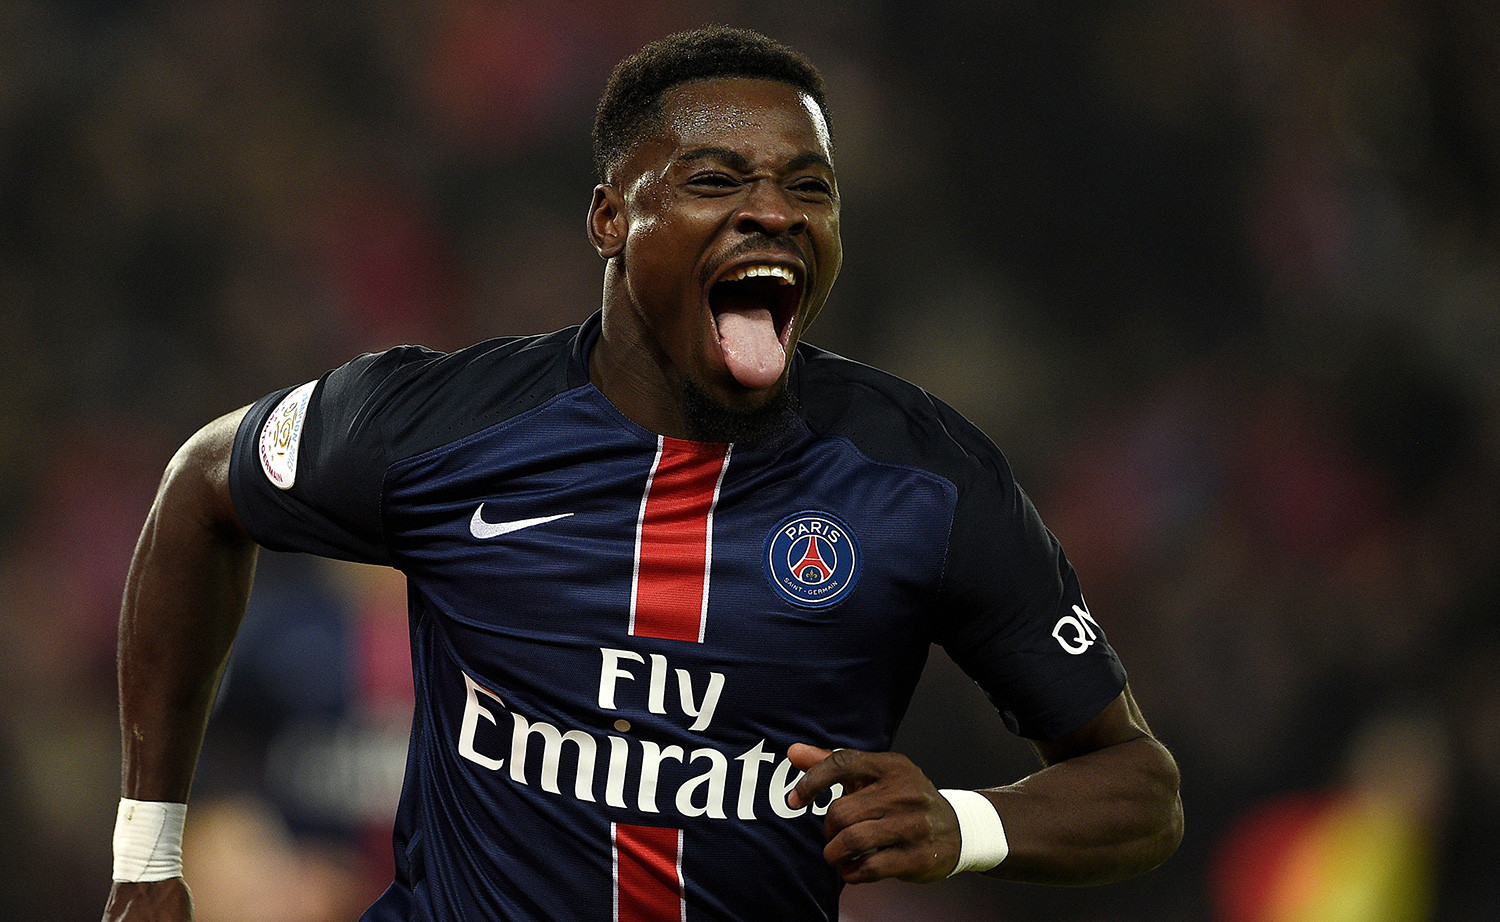 Aurier’s agent: “Contact with an Italian club but not Juve”